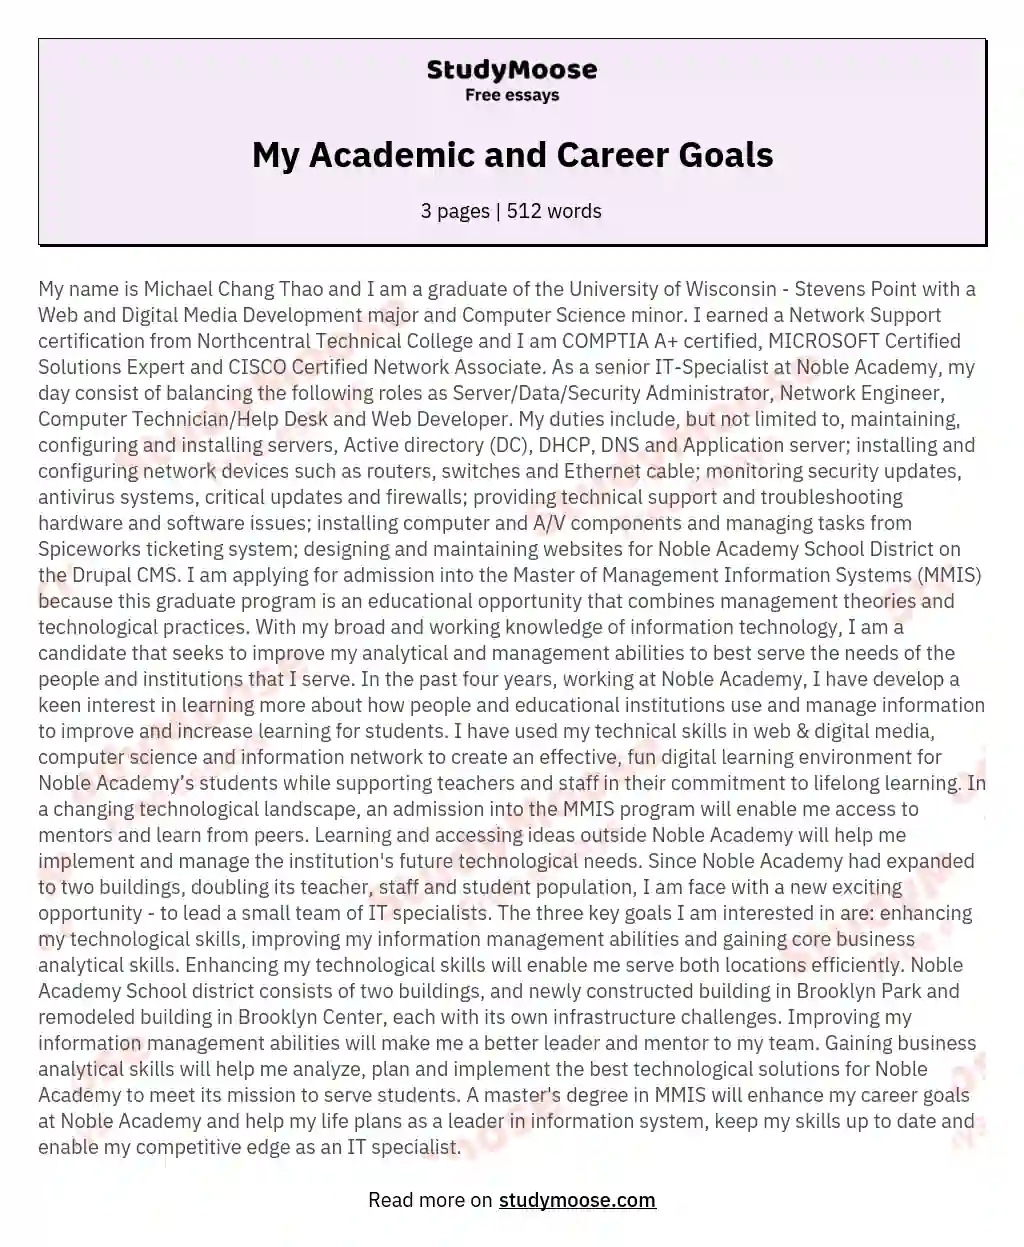 My Academic and Career Goals